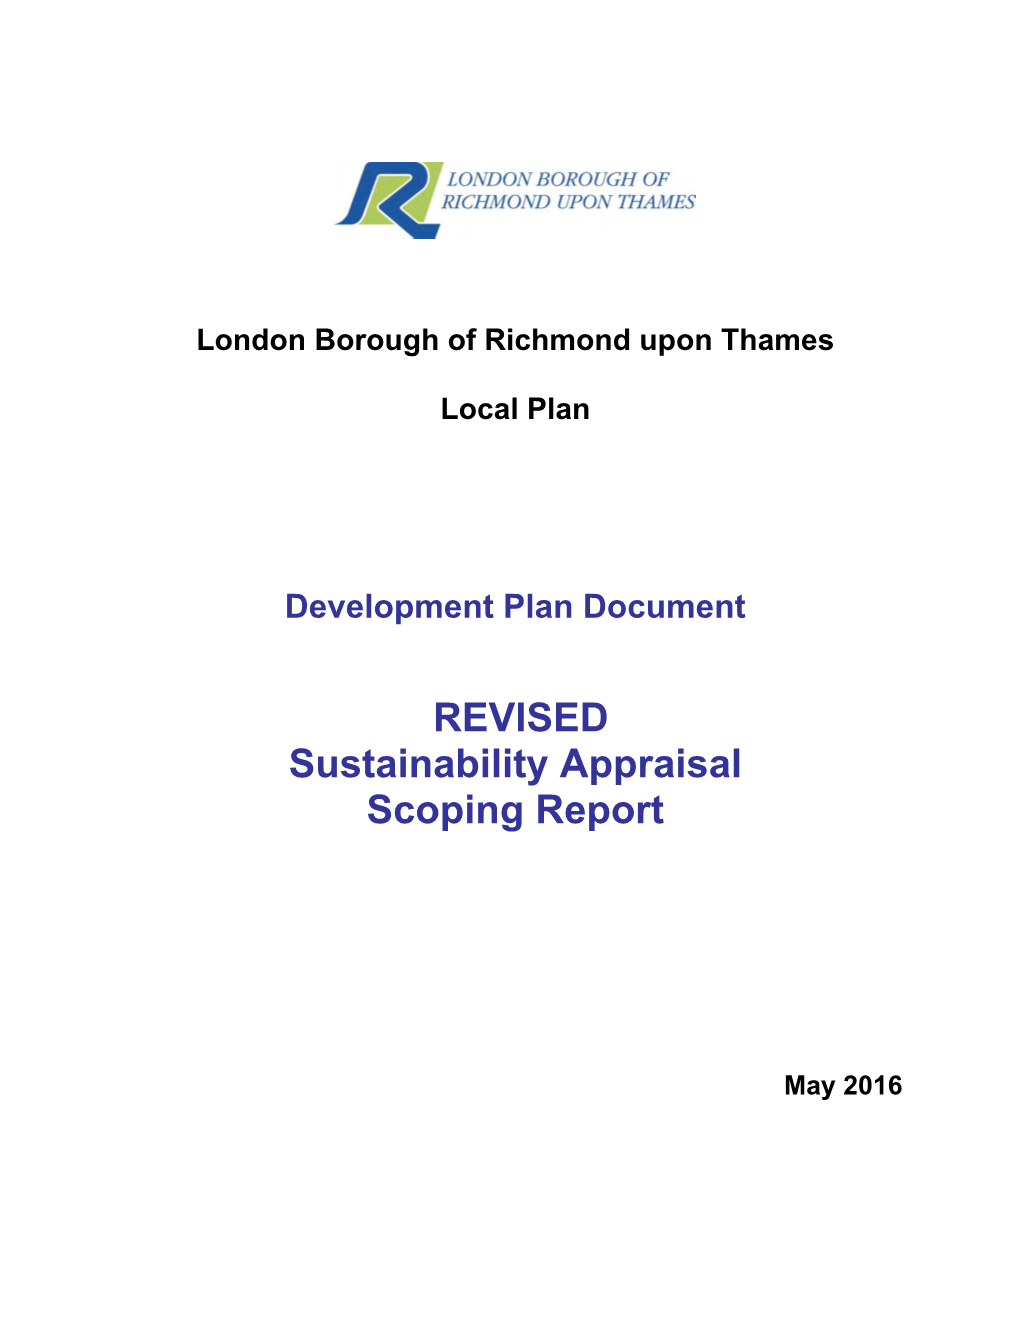 Revised Sustainability Appraisal Scoping Report July 2013